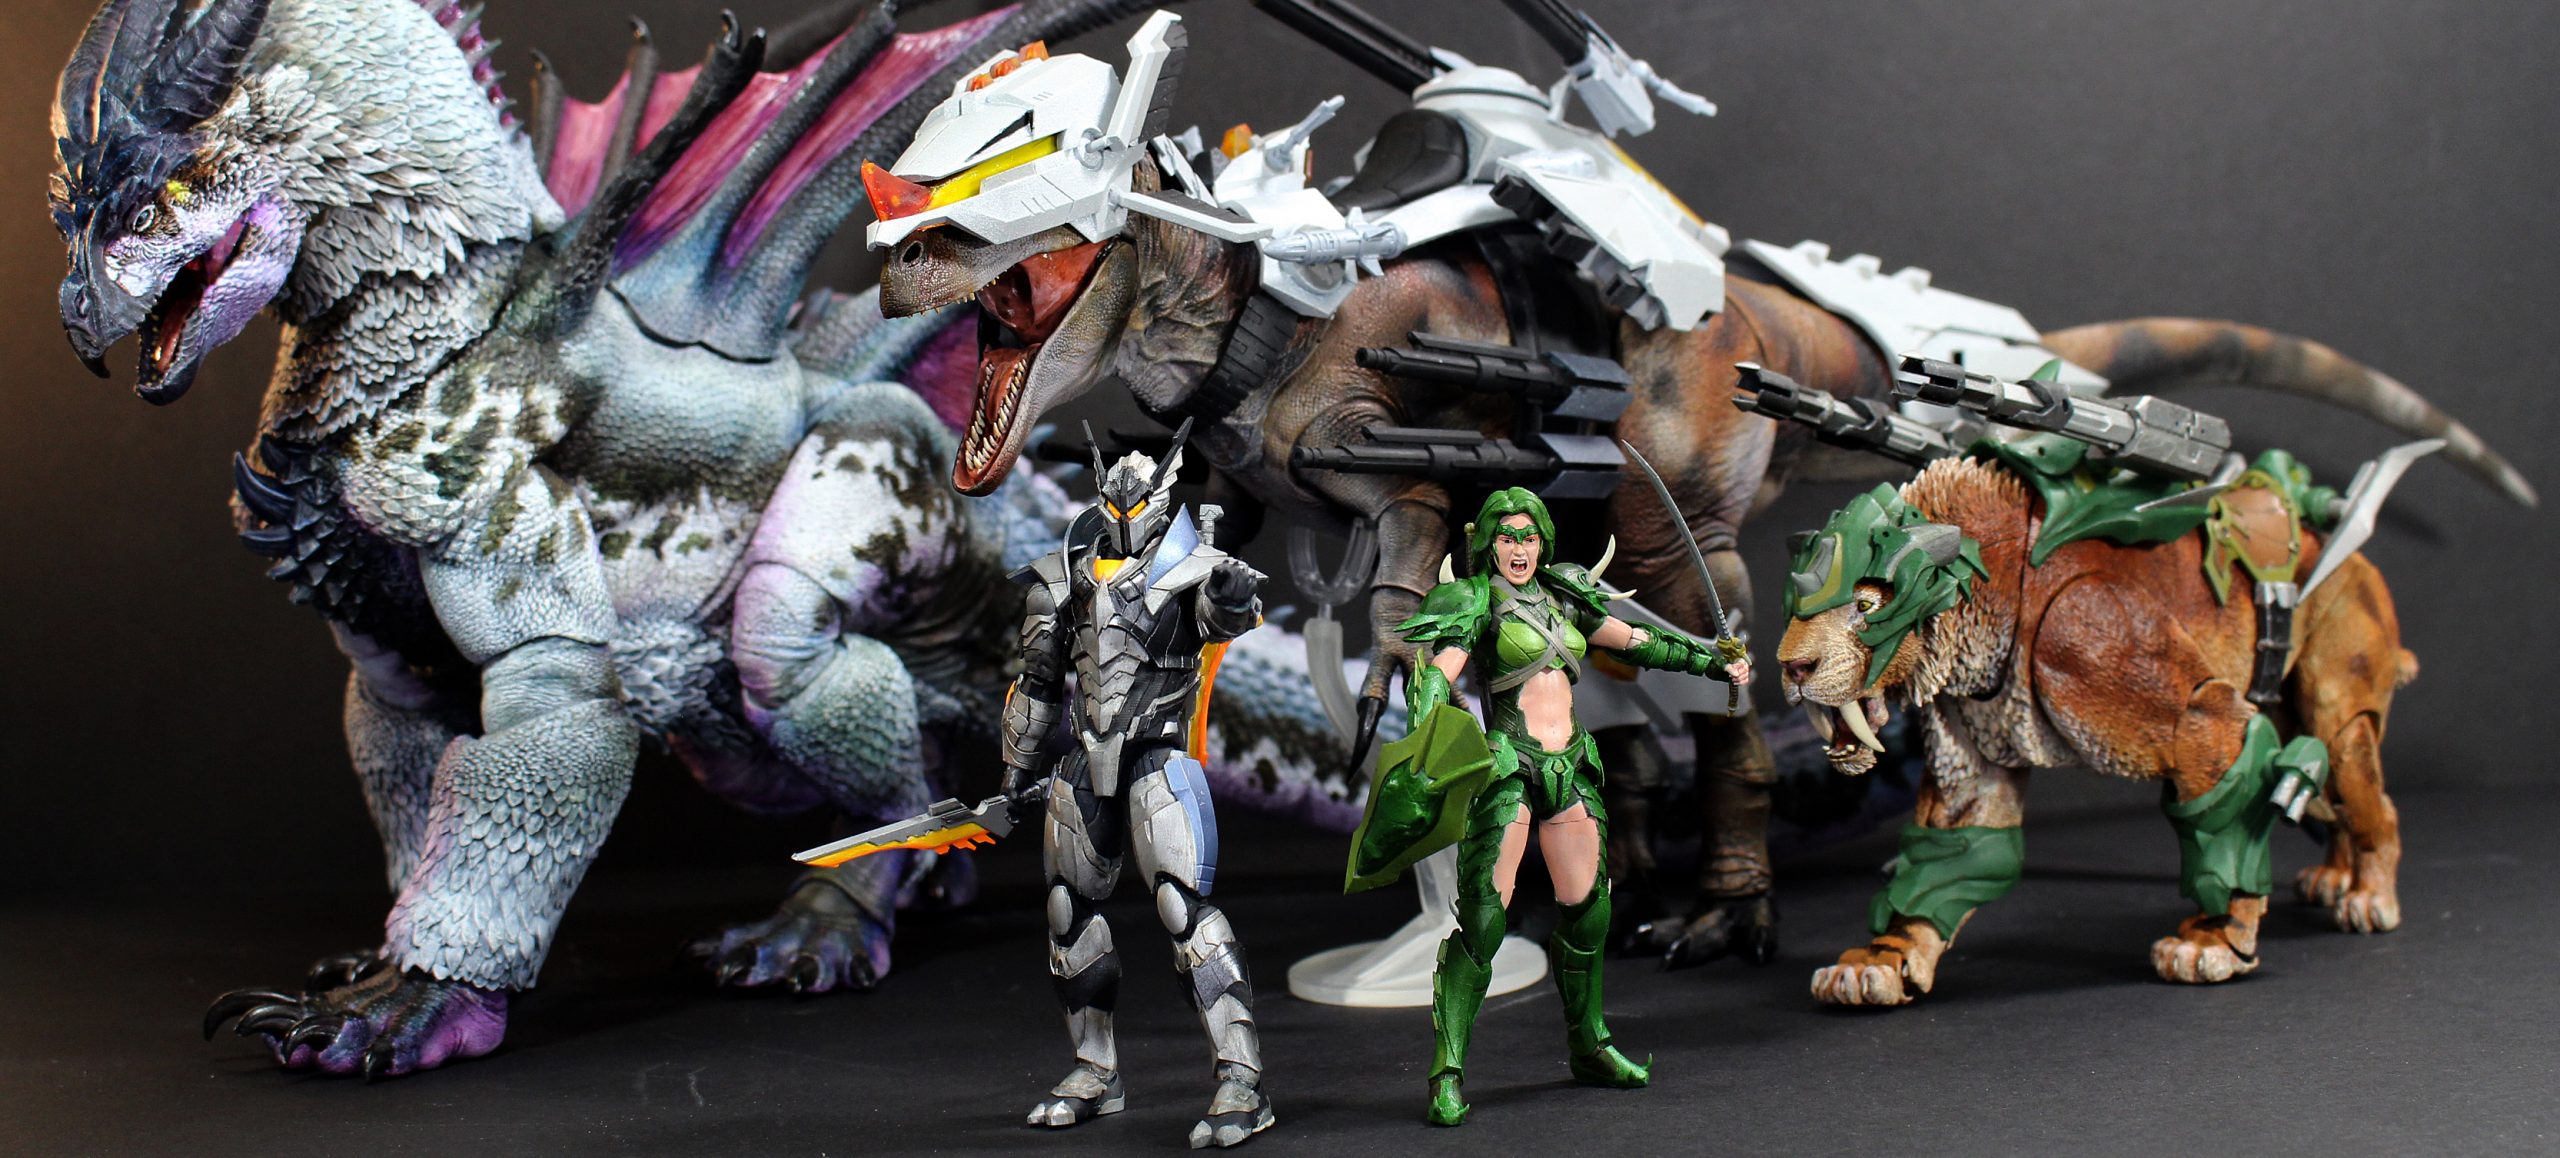 ‘Beasts of the Mesozoic’ Creator Launches CYBERZOIC – Sci Fi Dinosaur and Dragon Action Figures with Kickstarter Campaign